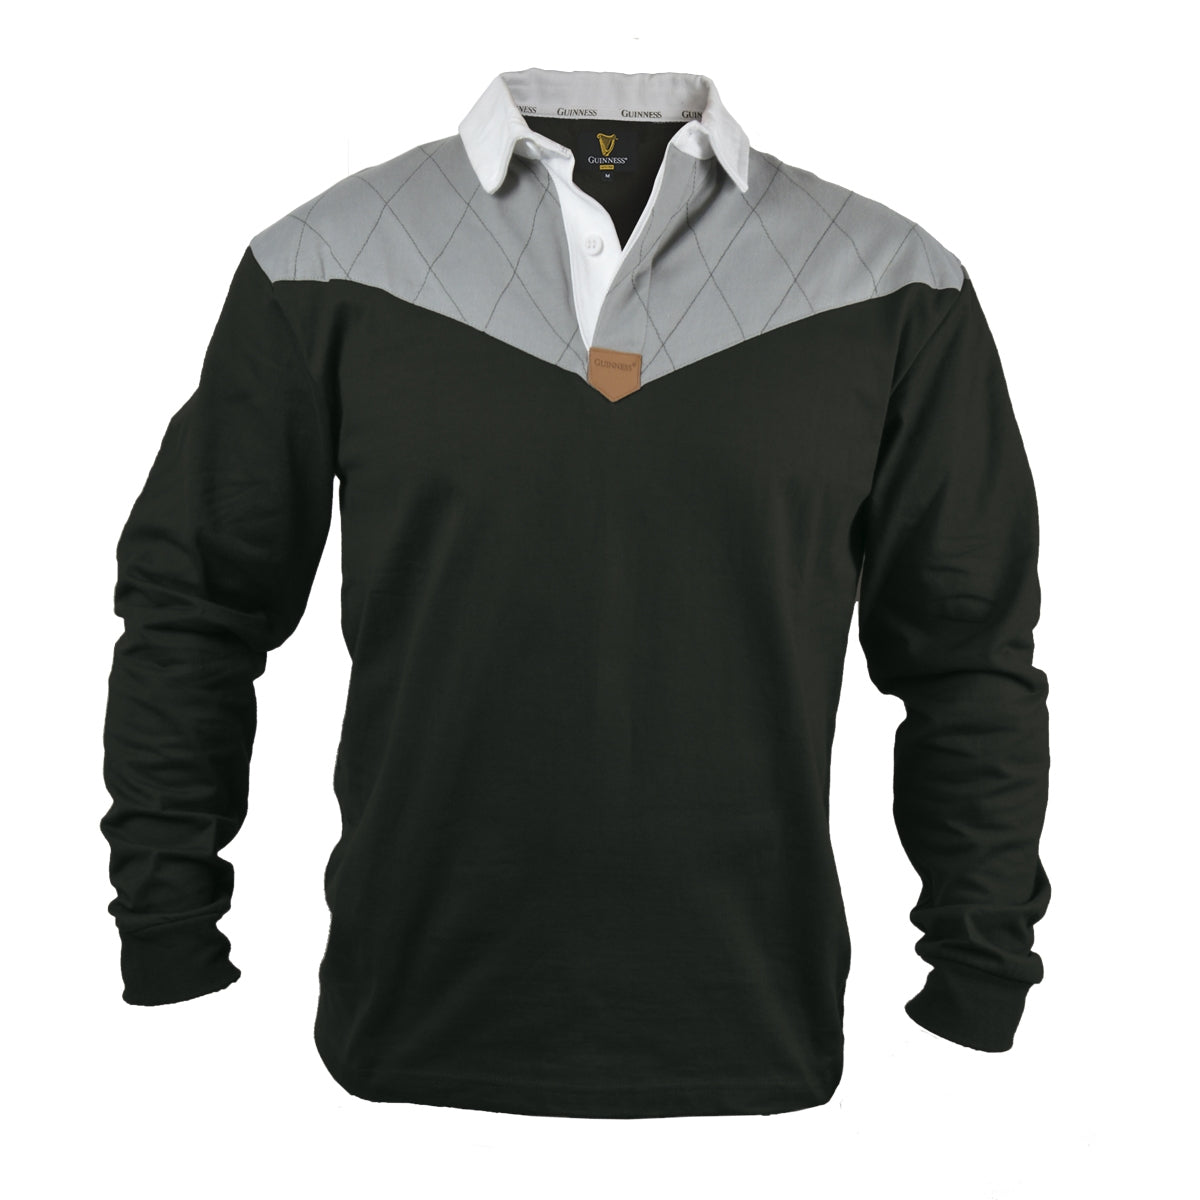 A men's Guinness Heritage Charcoal Grey & Black Long-Sleeve Rugby jersey, made with cotton fabric.